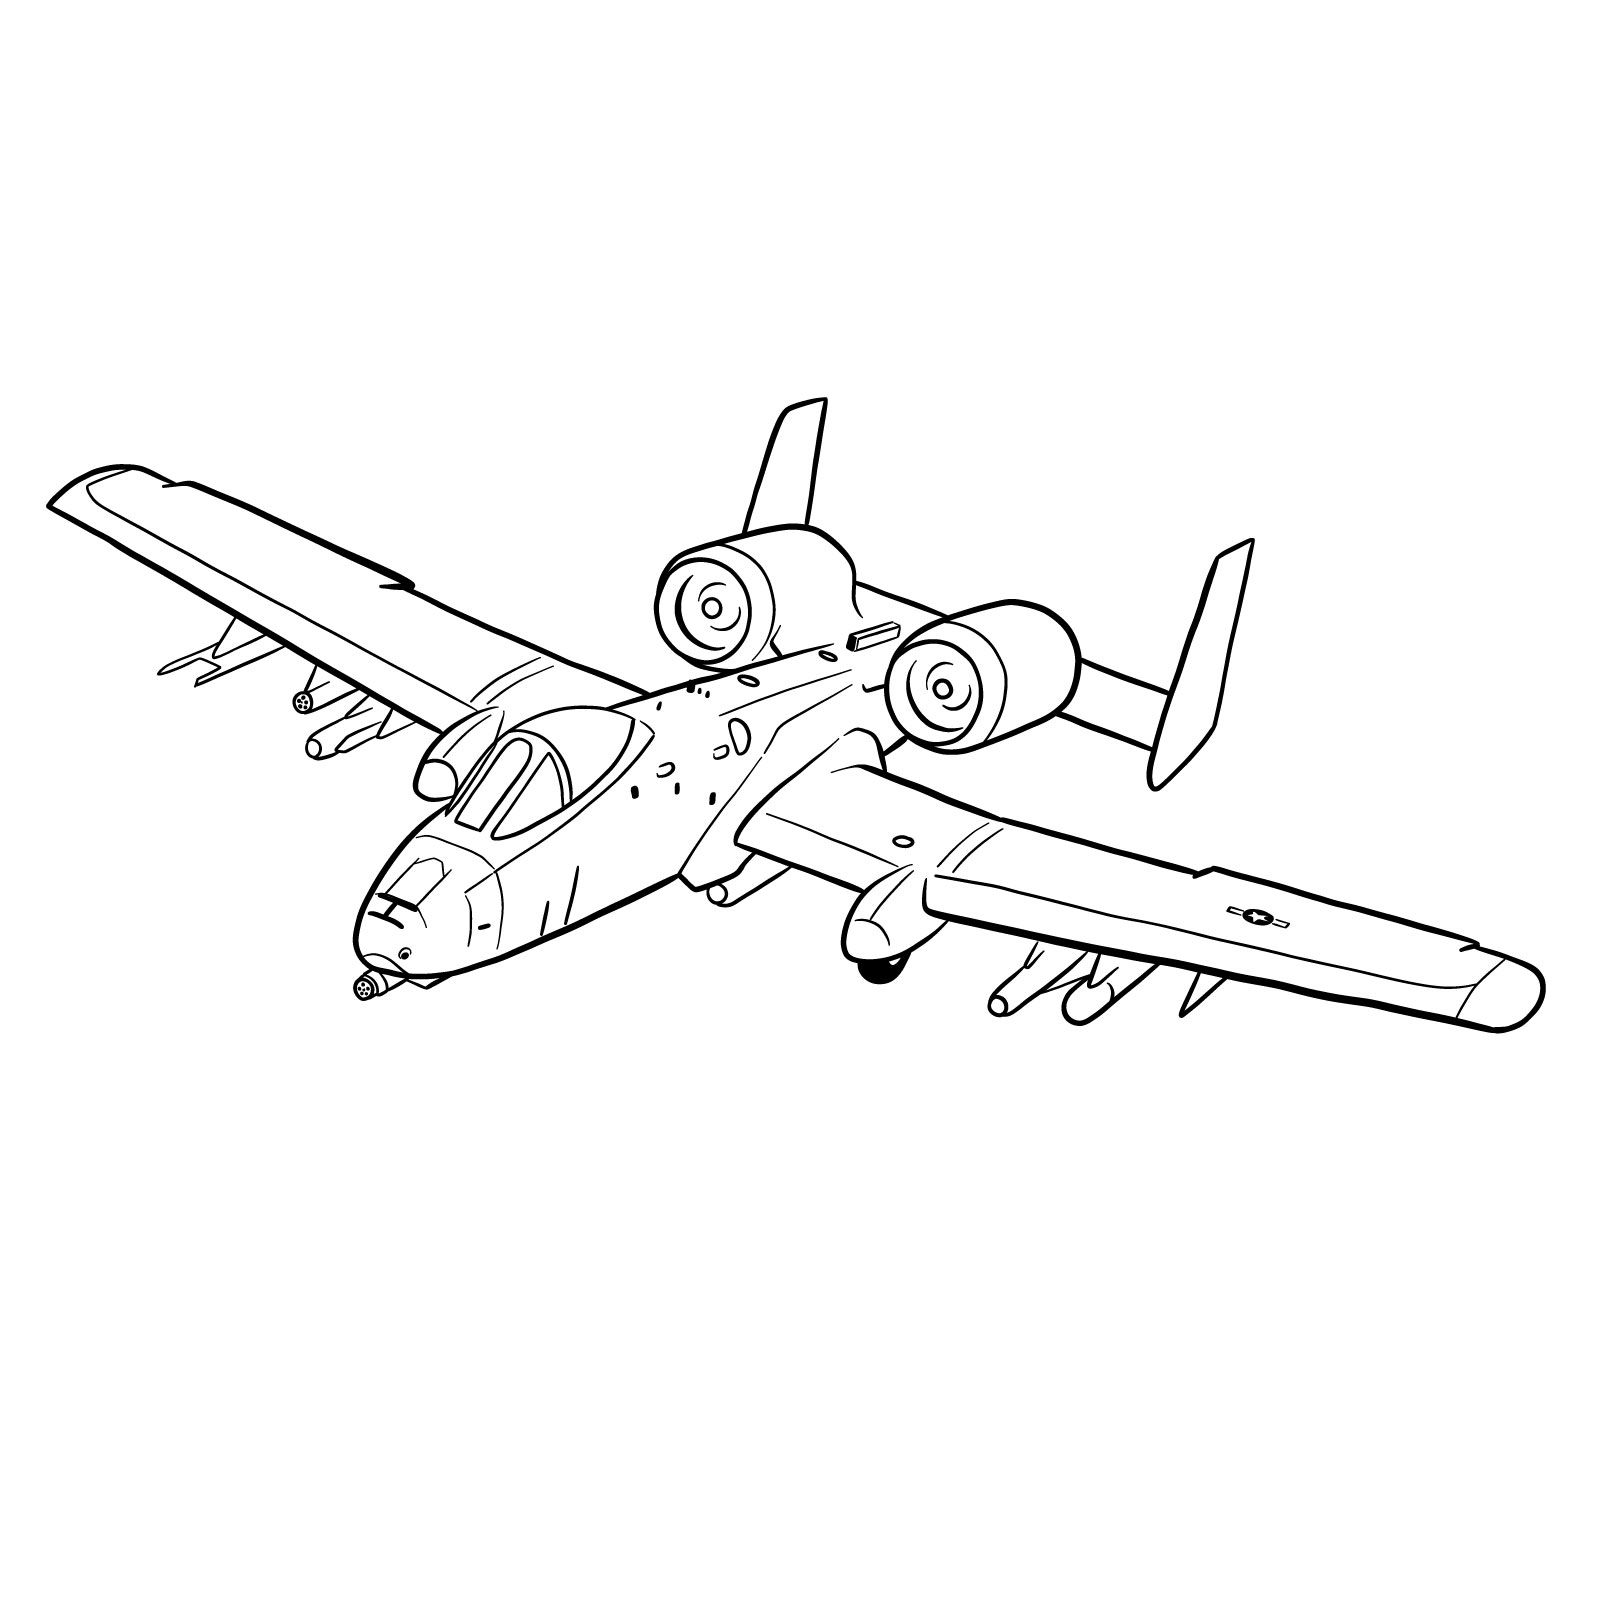 How to draw A-10 Thunderbolt II - coloring